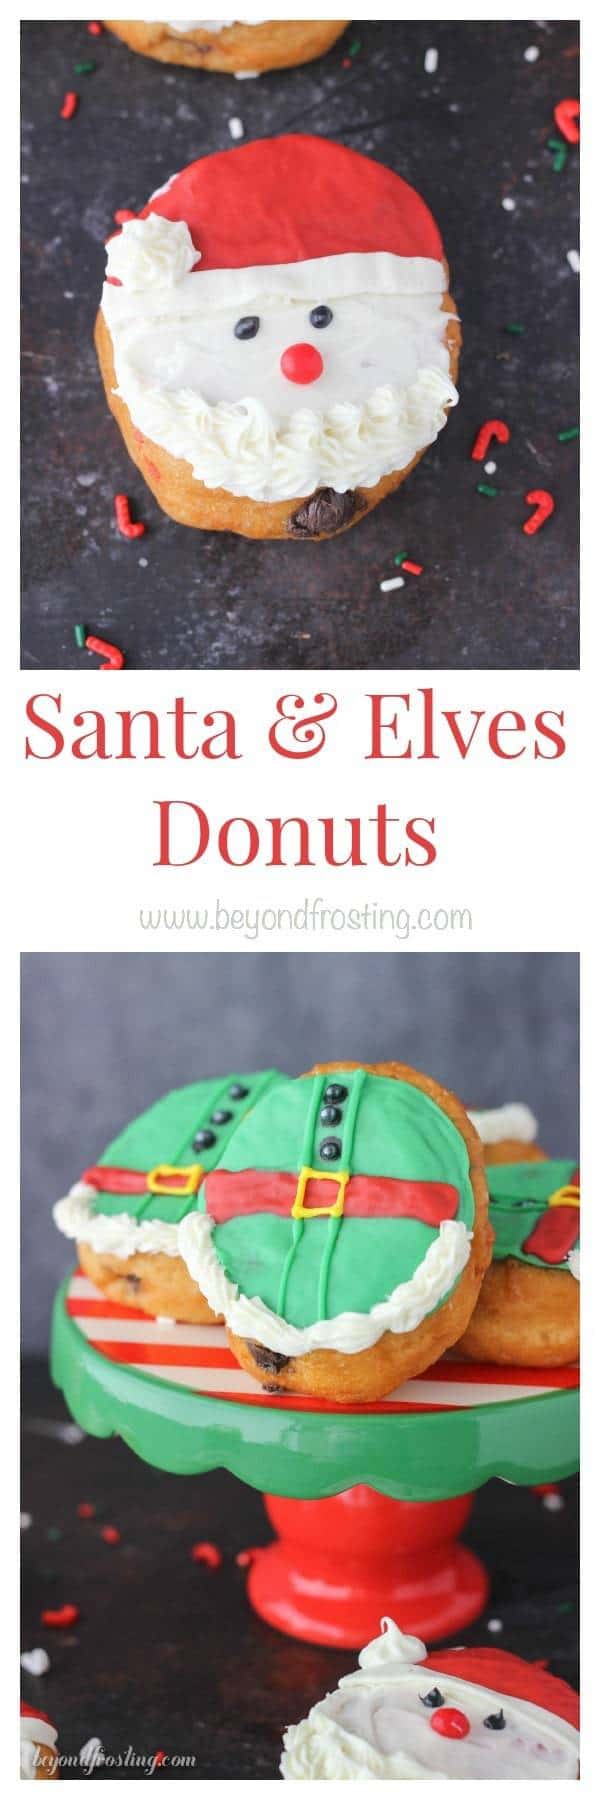 These Santa and Elves Donuts are made with Pillsbury Grands Biscuits, filled with a chocolate buttercream and decorated santa heads and elves.